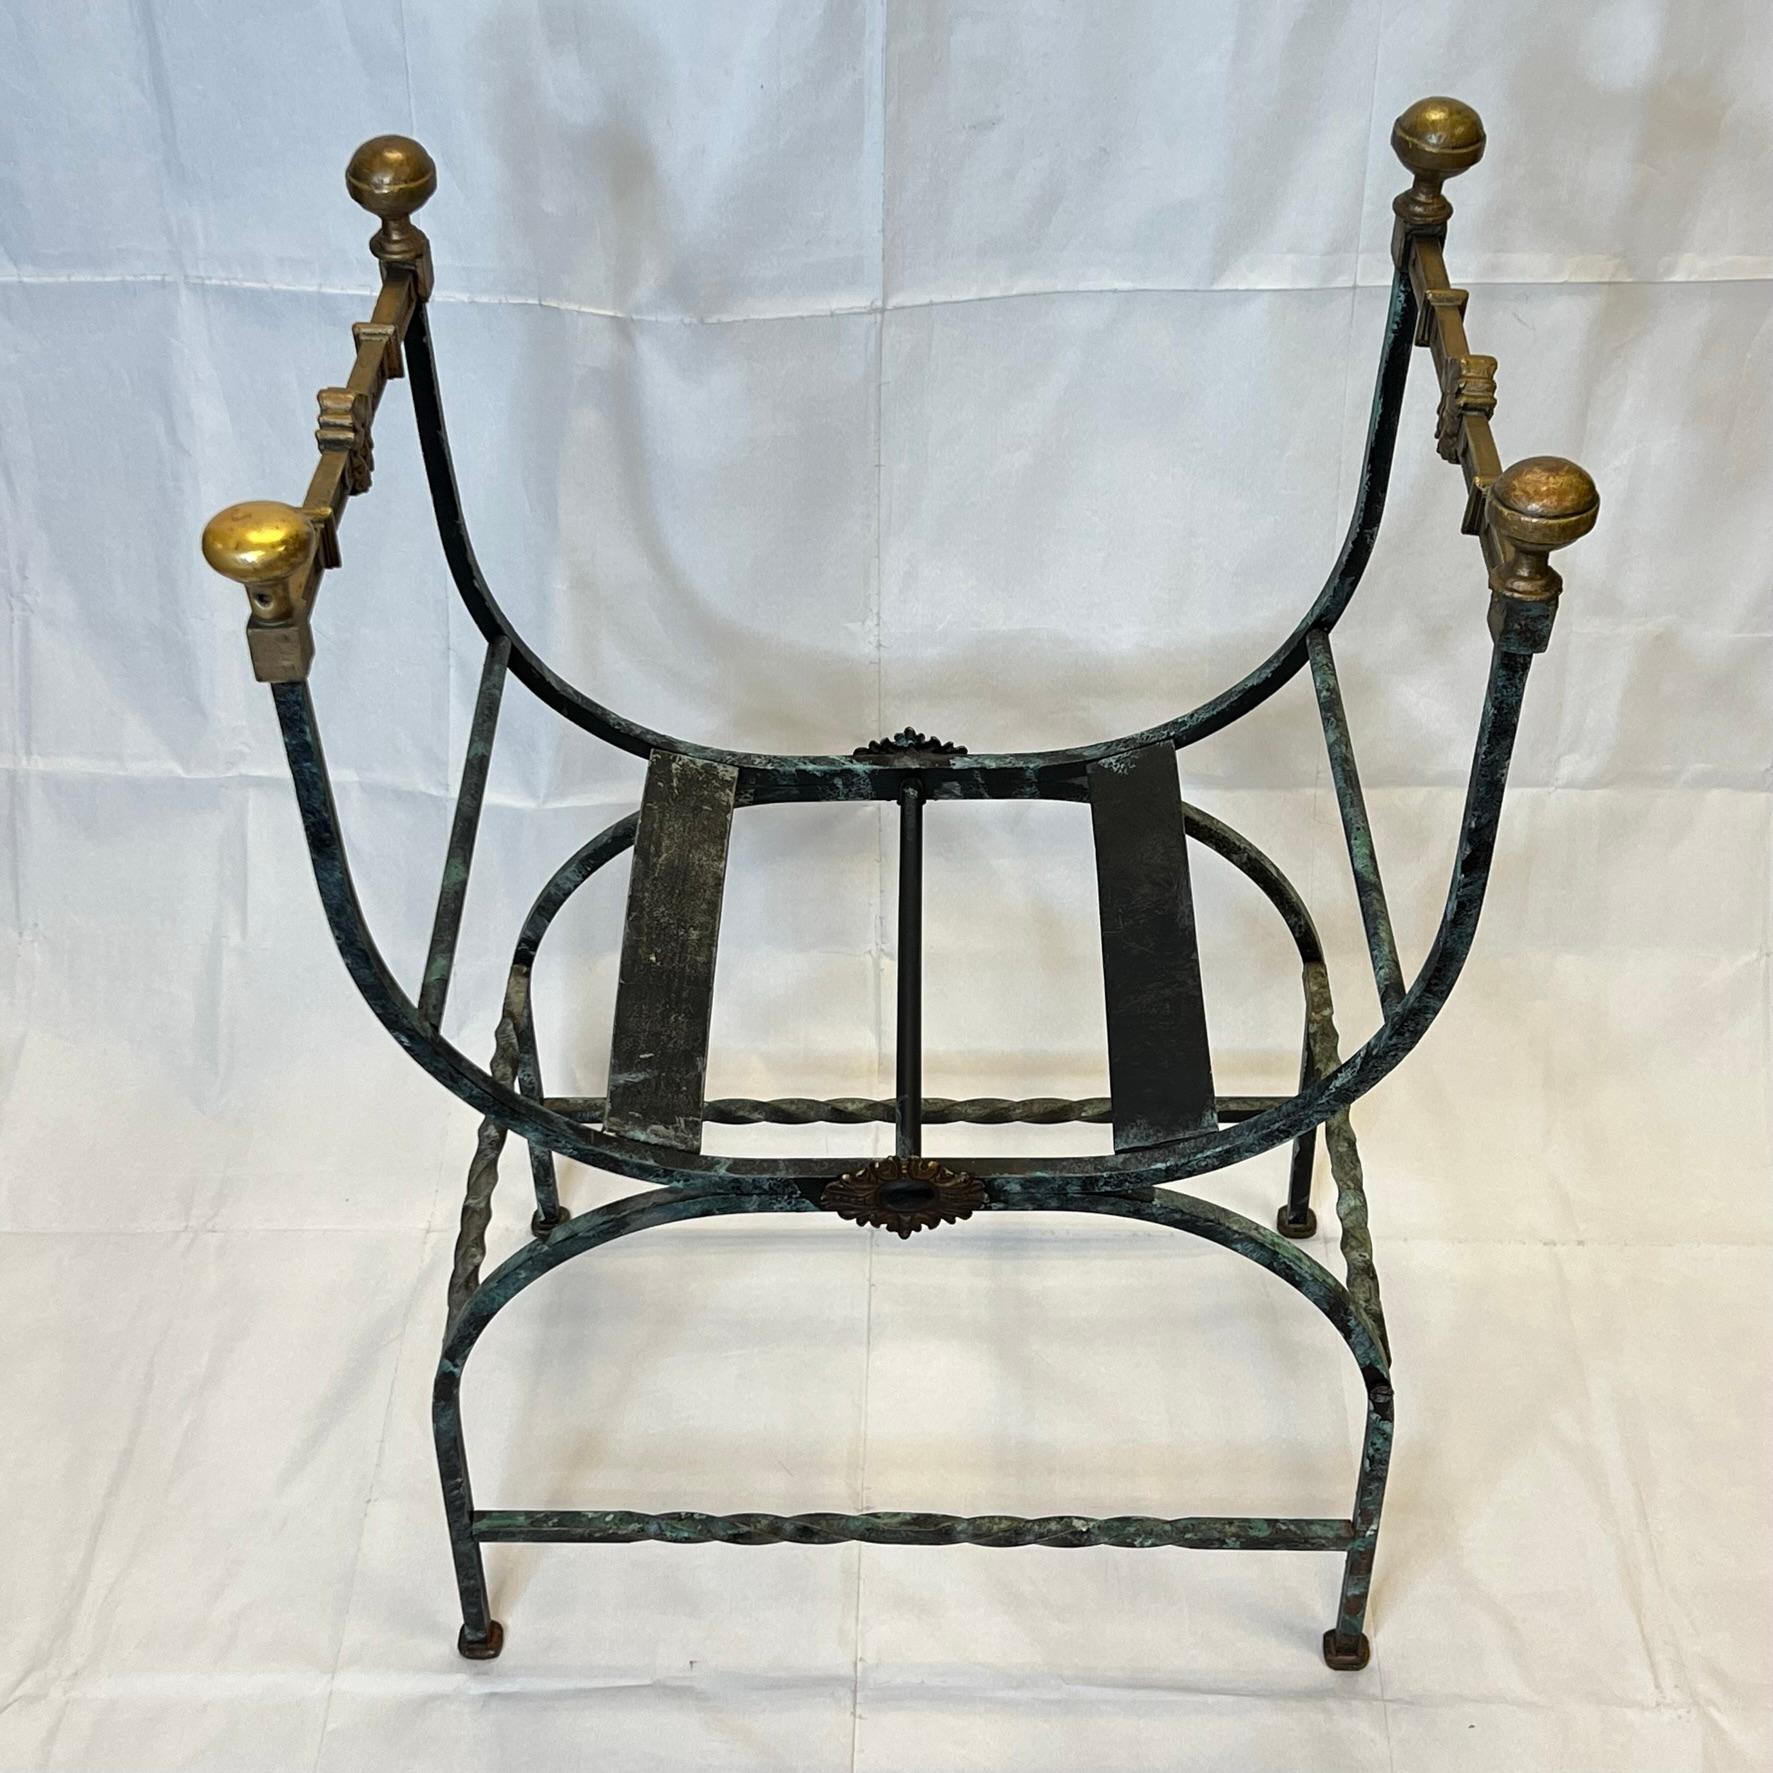 French Wrought Iron Bench in Renaissance Style with Sheepskin Seat Cushion